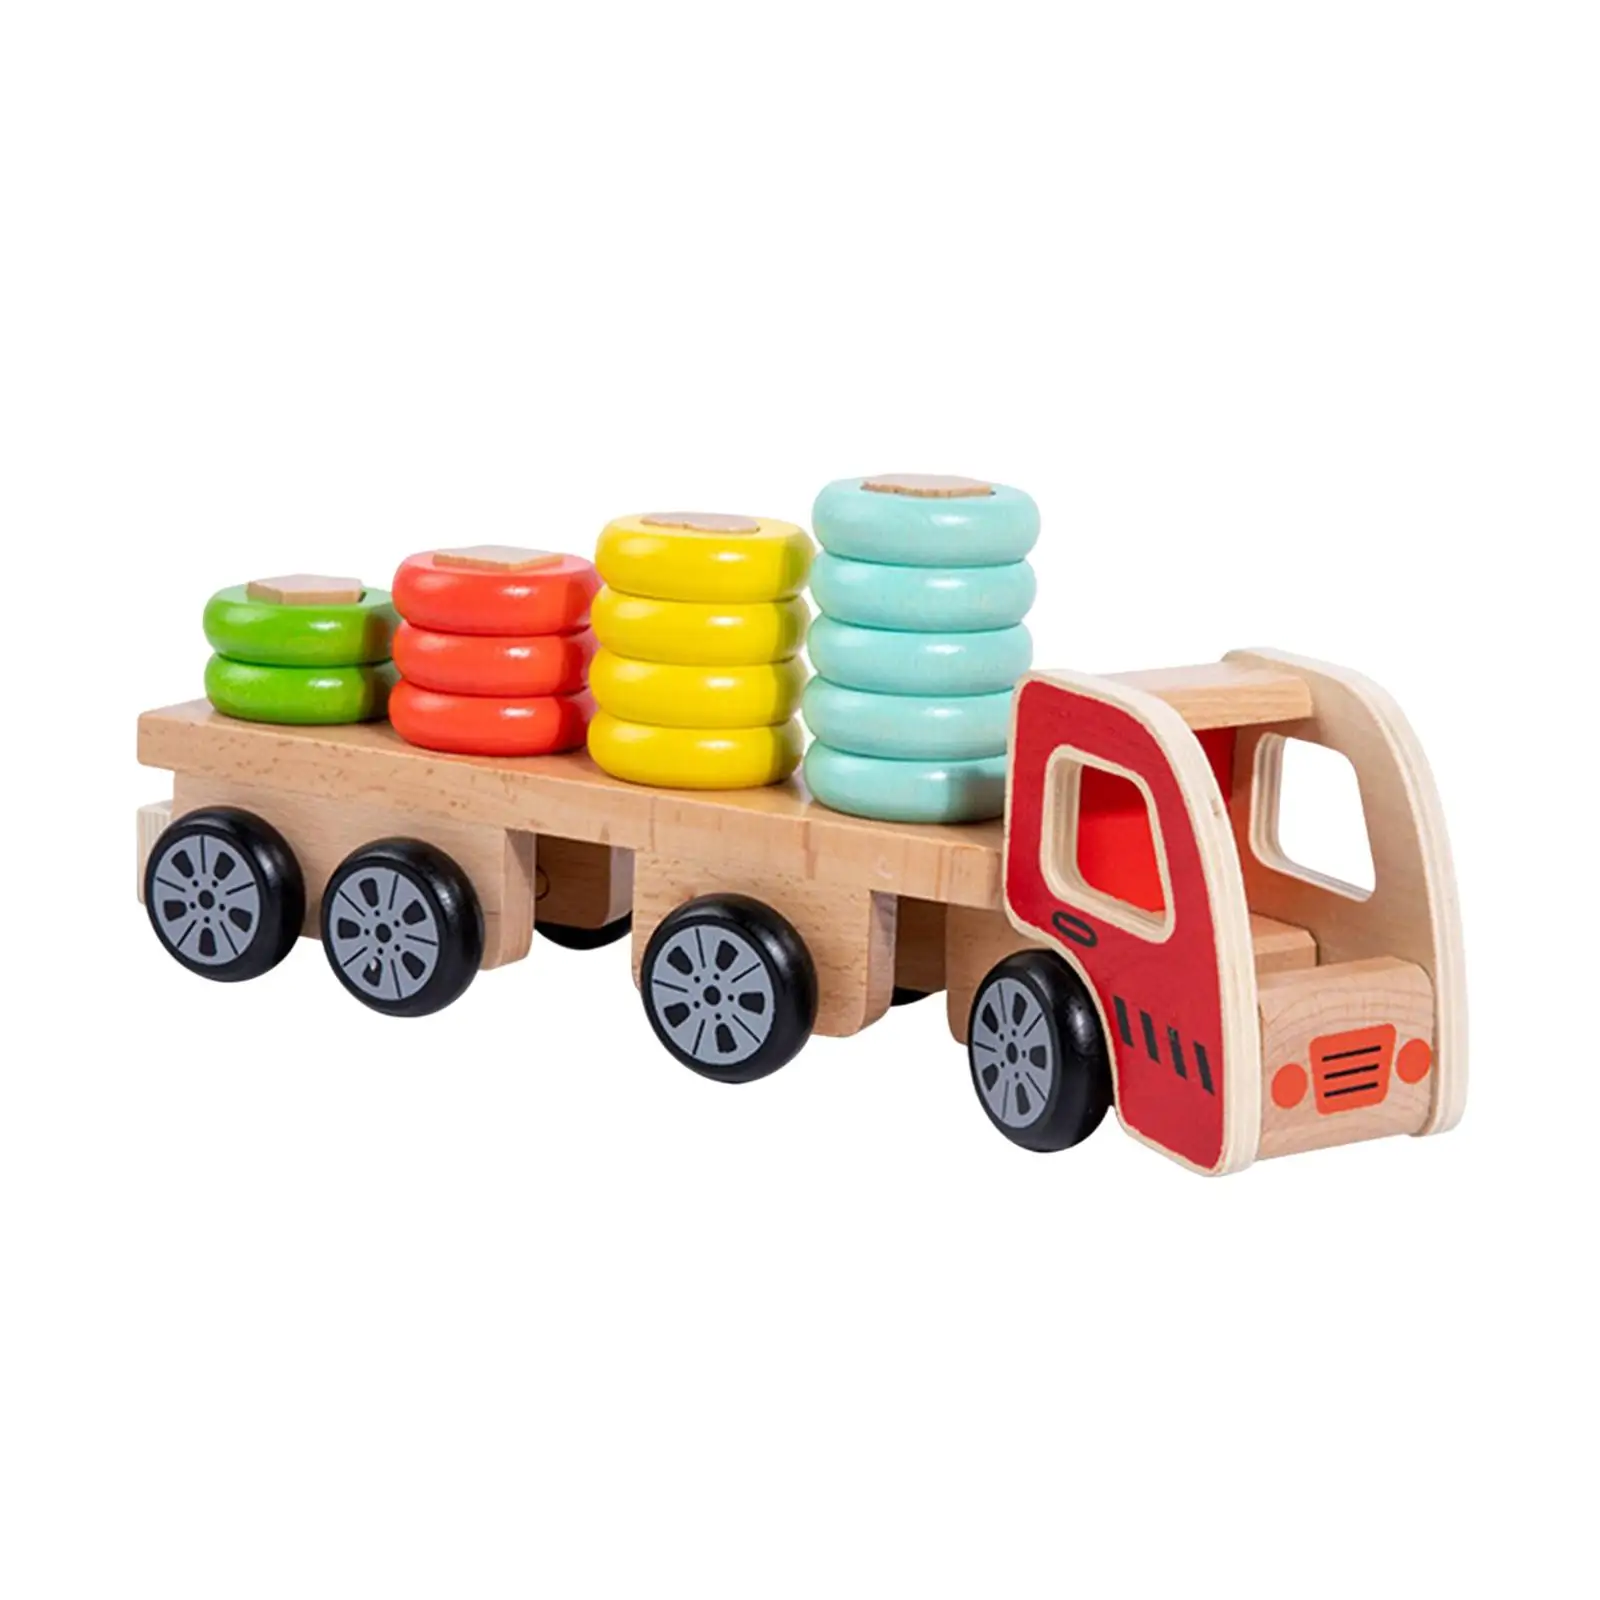 Classic Wooden Stacking Train Shape Sorting Wooden Toddler Toy for Toddlers Ages 2+ Girls Boys